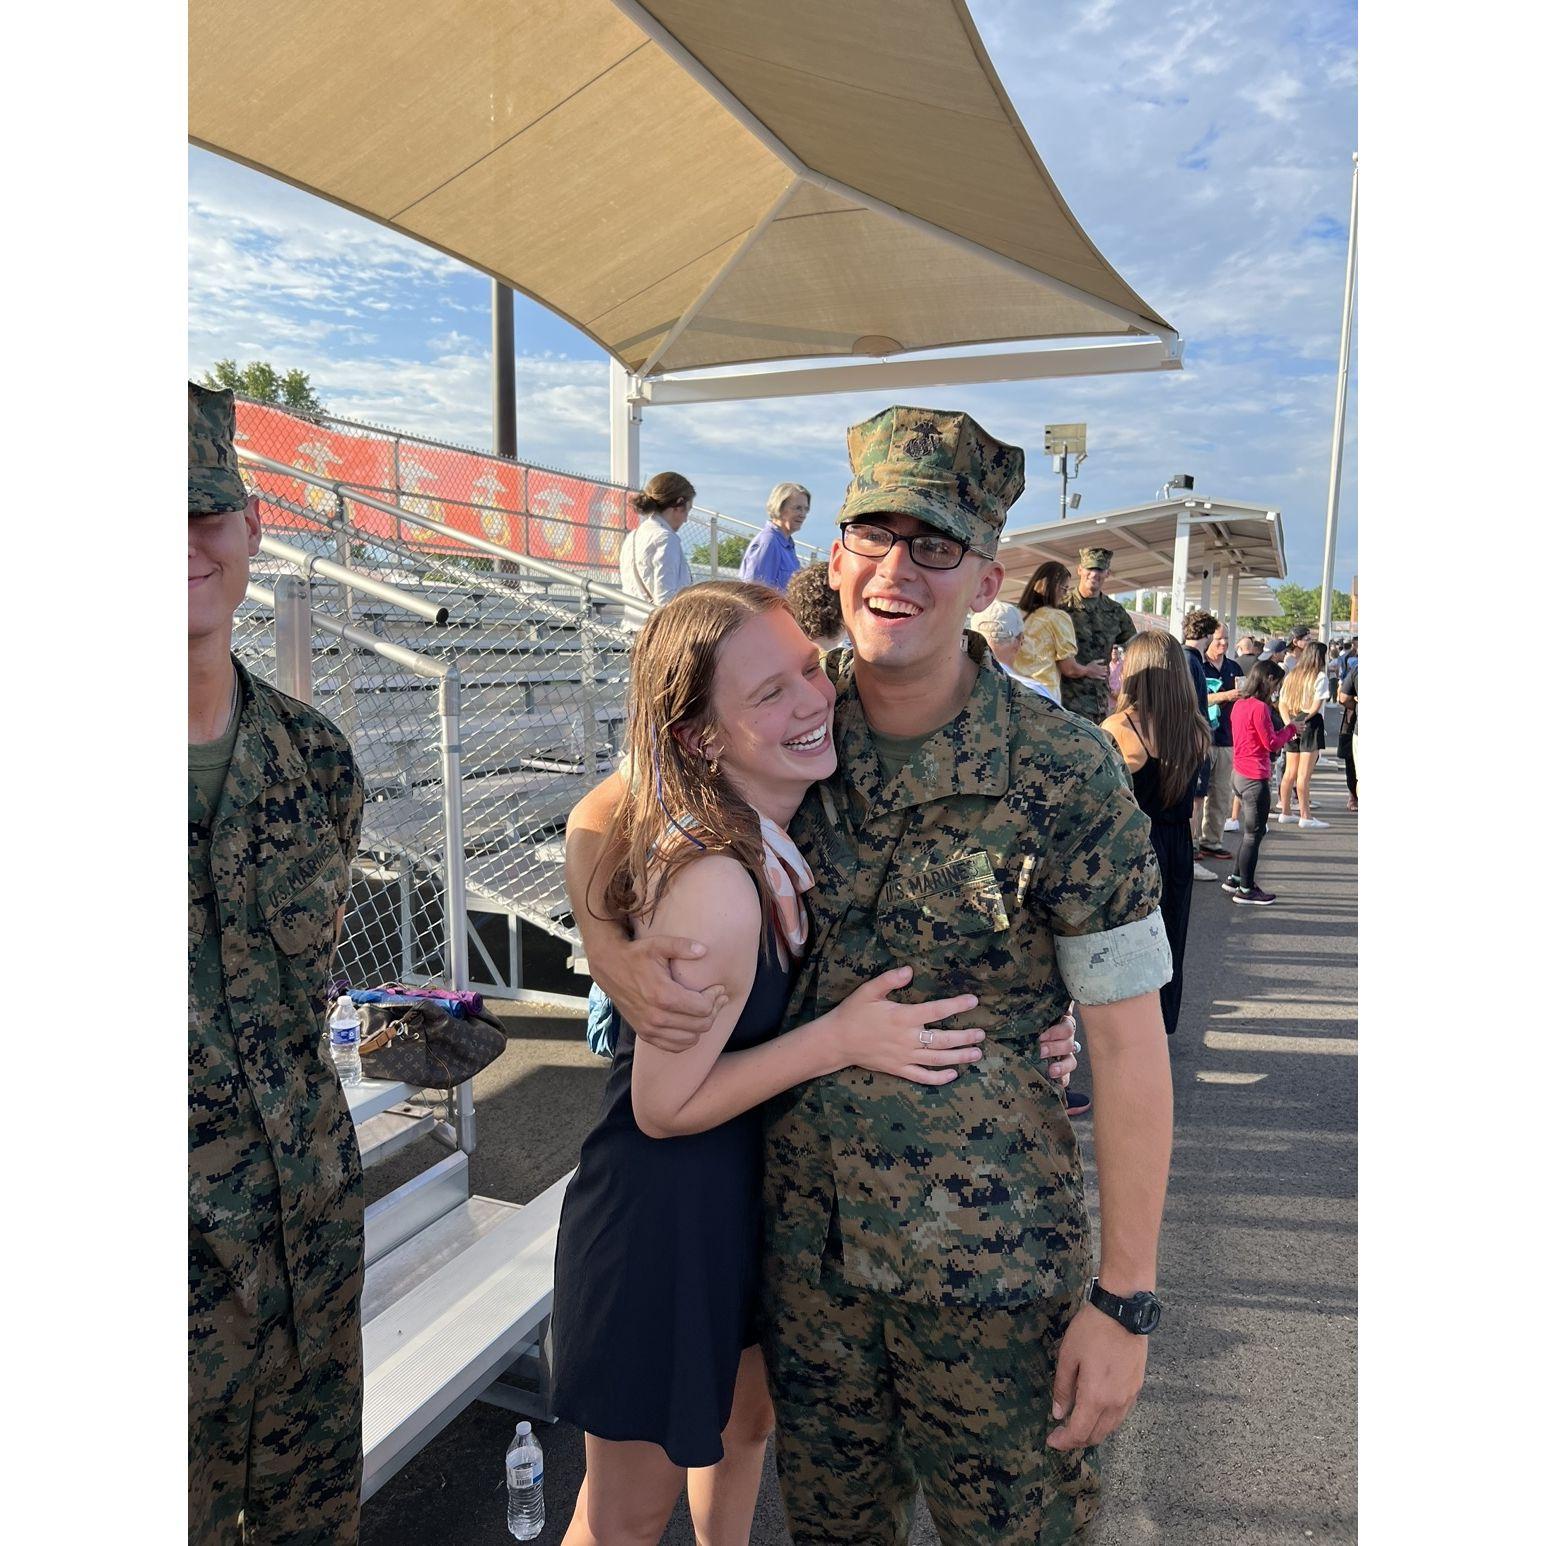 SURPRISE! I went to Grant's graduation from OCS in Quantico and he had no idea I was coming! Seeing him in person was surreal after writing letters for the summer. August 5, 2022.